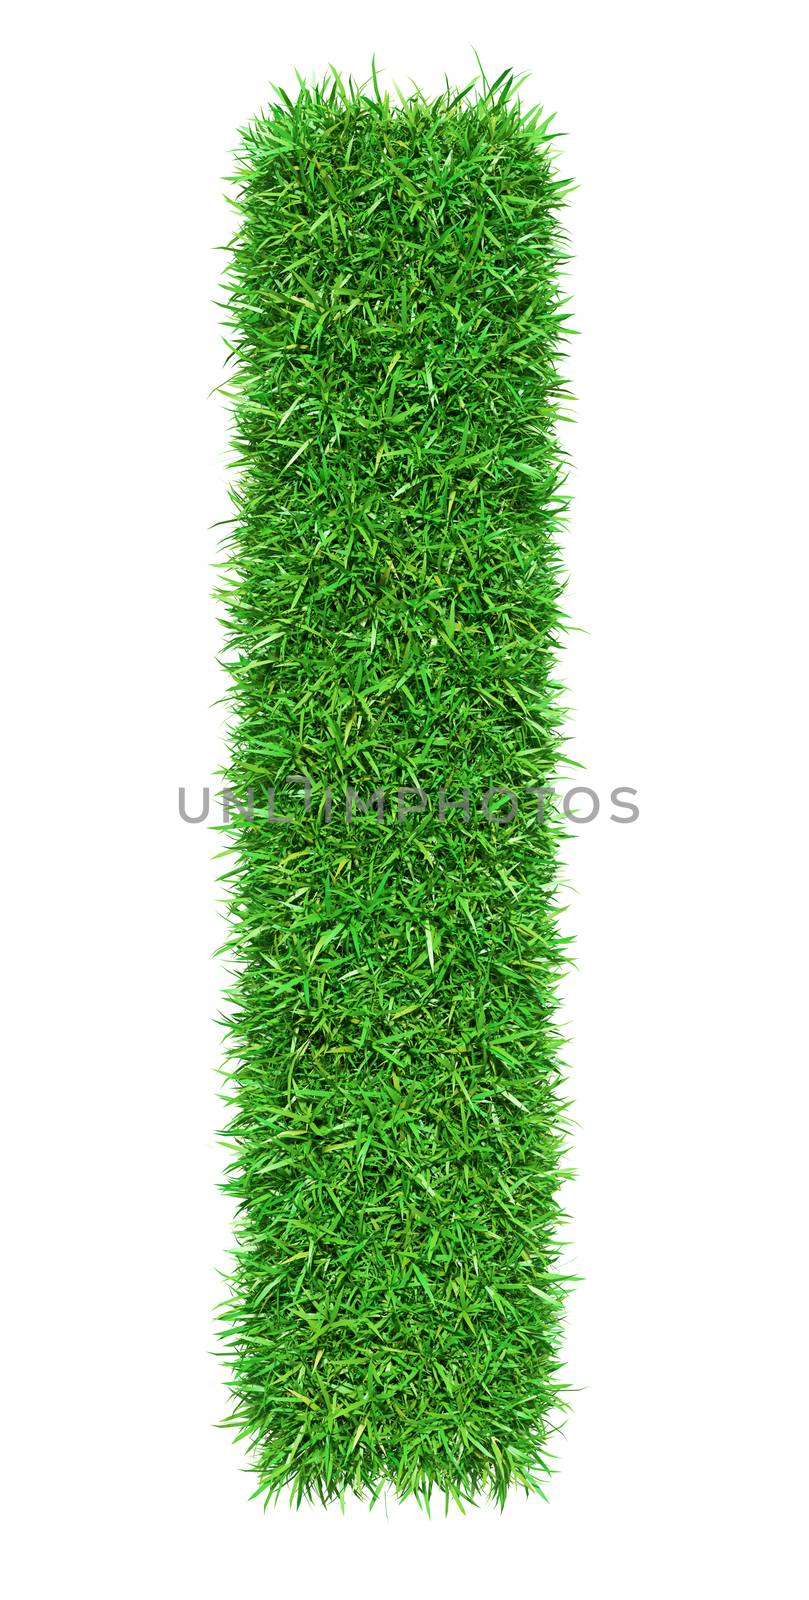 Green Grass Letter L. Isolated On White Background. Font For Your Design. 3D Illustration